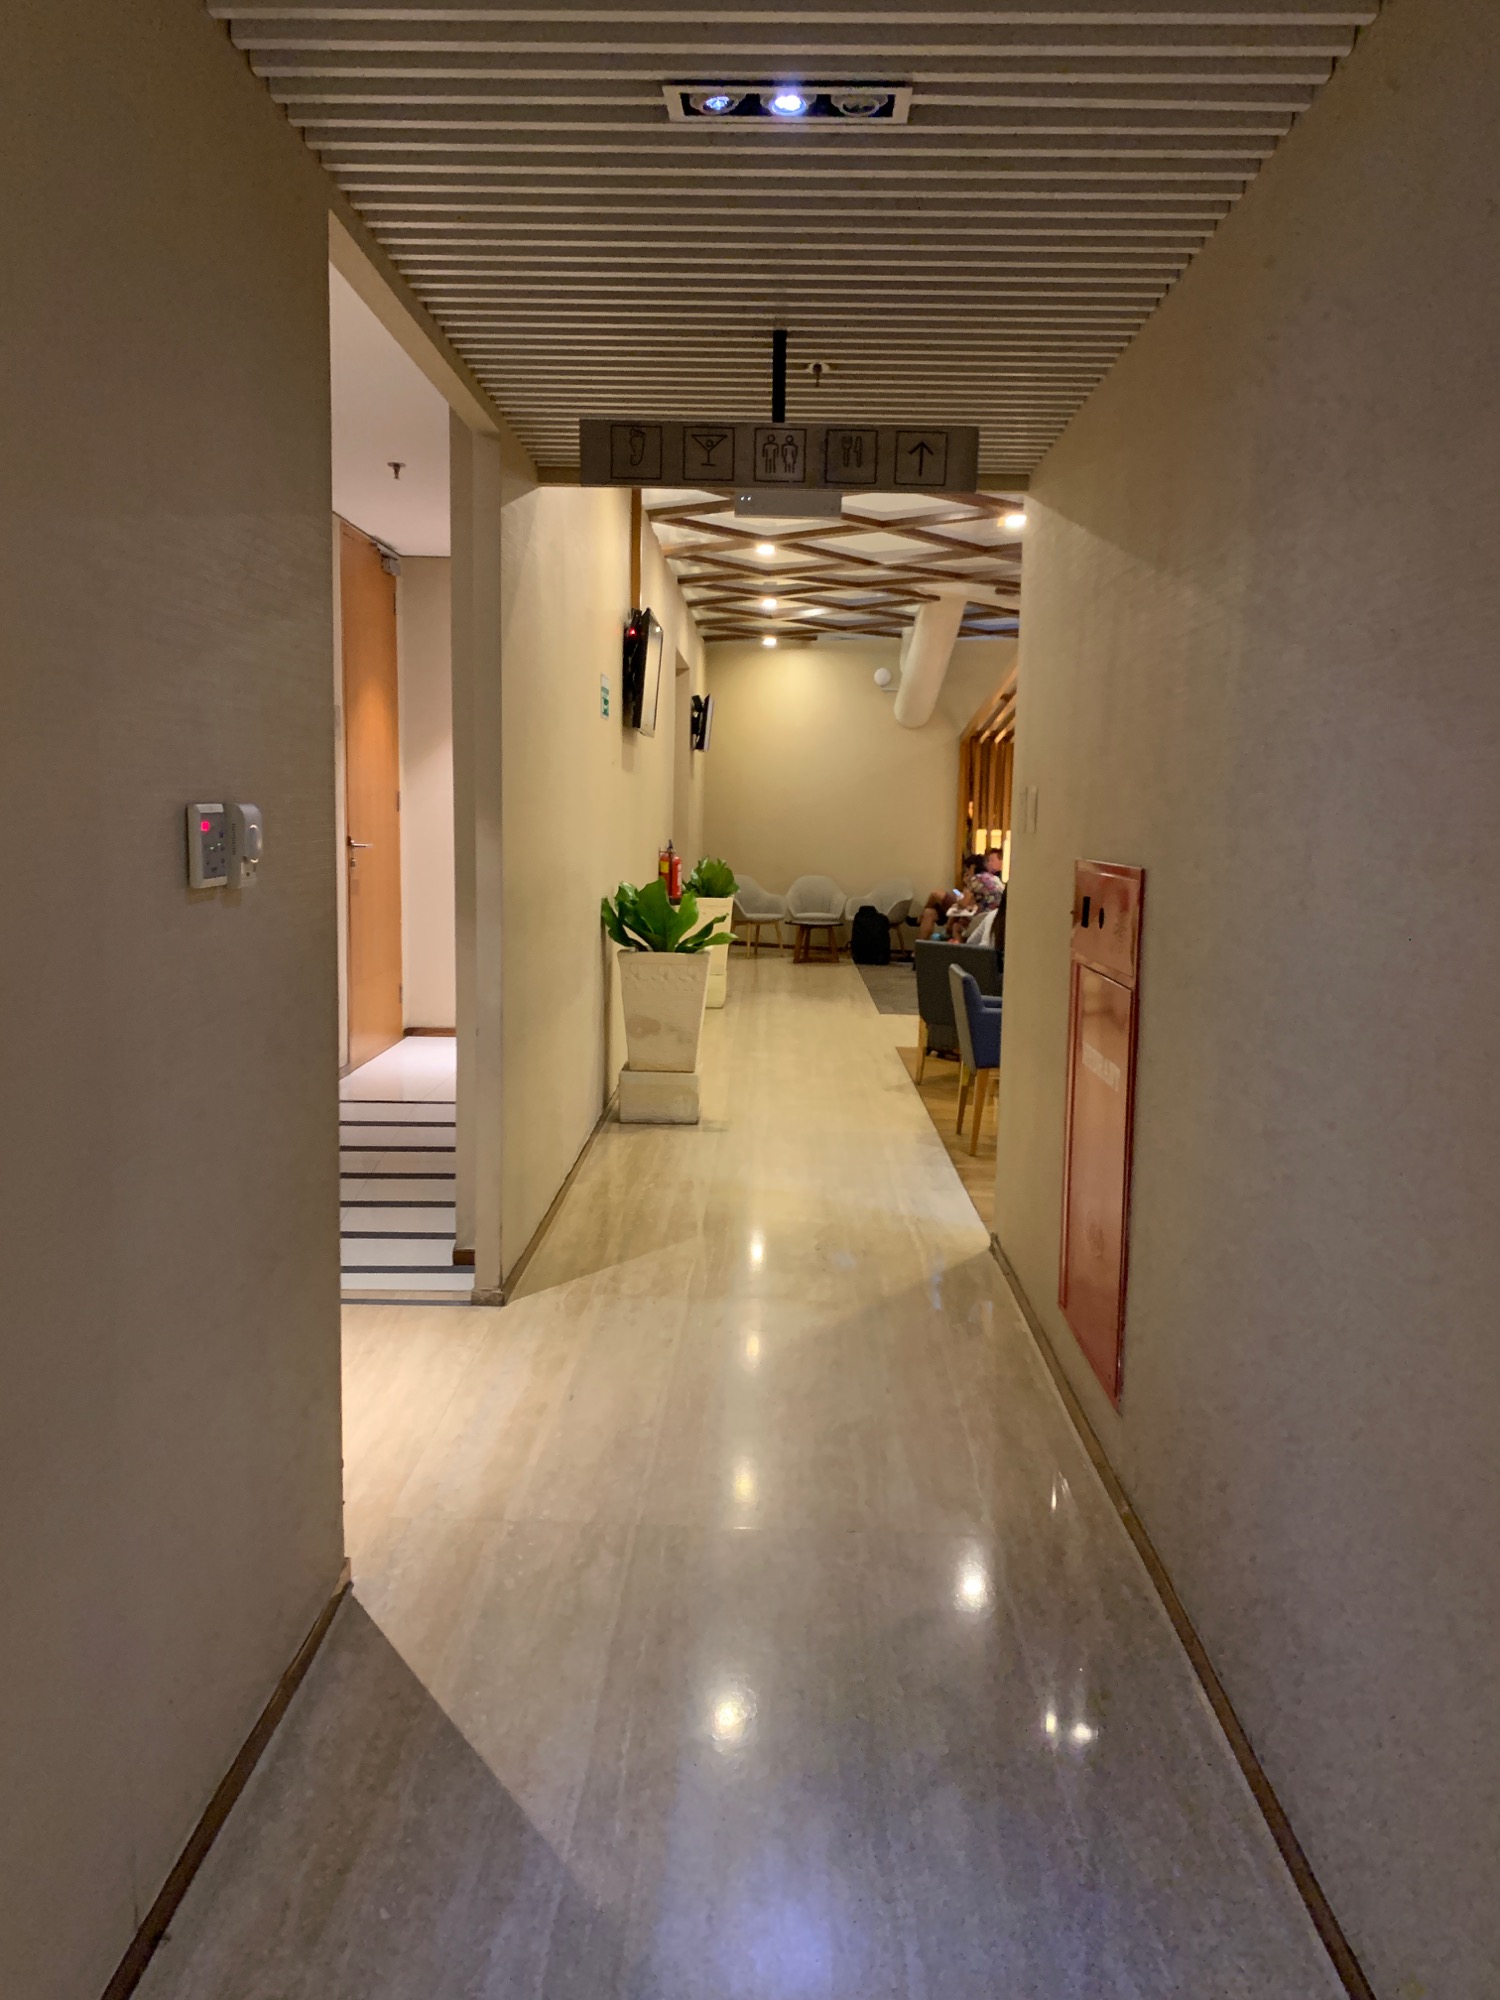 a hallway with a light shining on the walls